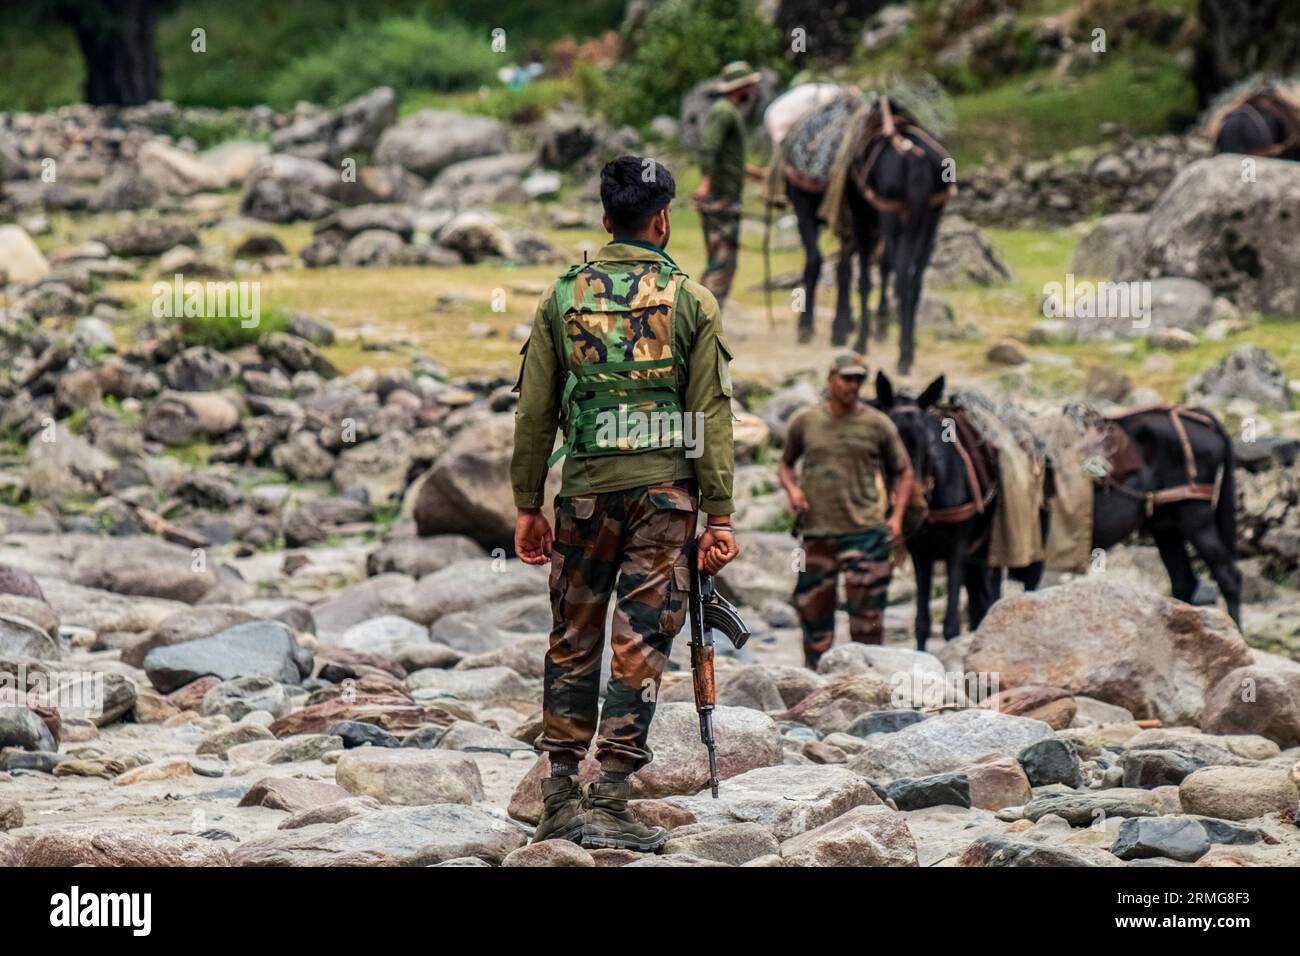 August 25, 2023, Keran Kupwara, Jammu and Kashmir, India: Indian army soldier stands guard as other colleagues seen with their horses as they prepare to head towards their bunkers, at Neelam river or Kishan Ganga that has divided Kashmir into two parts controlled by nuclear rivals India and Pakistan. The river acts as a disputed line of control and flows through a village called Keran from both sides which is located on the northern side of Indian Kashmir's Border district Kupwara some 150kms from Srinagar and 93kms from Muzaffarabad, in the Pakistan side of Kashmir. (Credit Image: © Faisal Ba Stock Photo